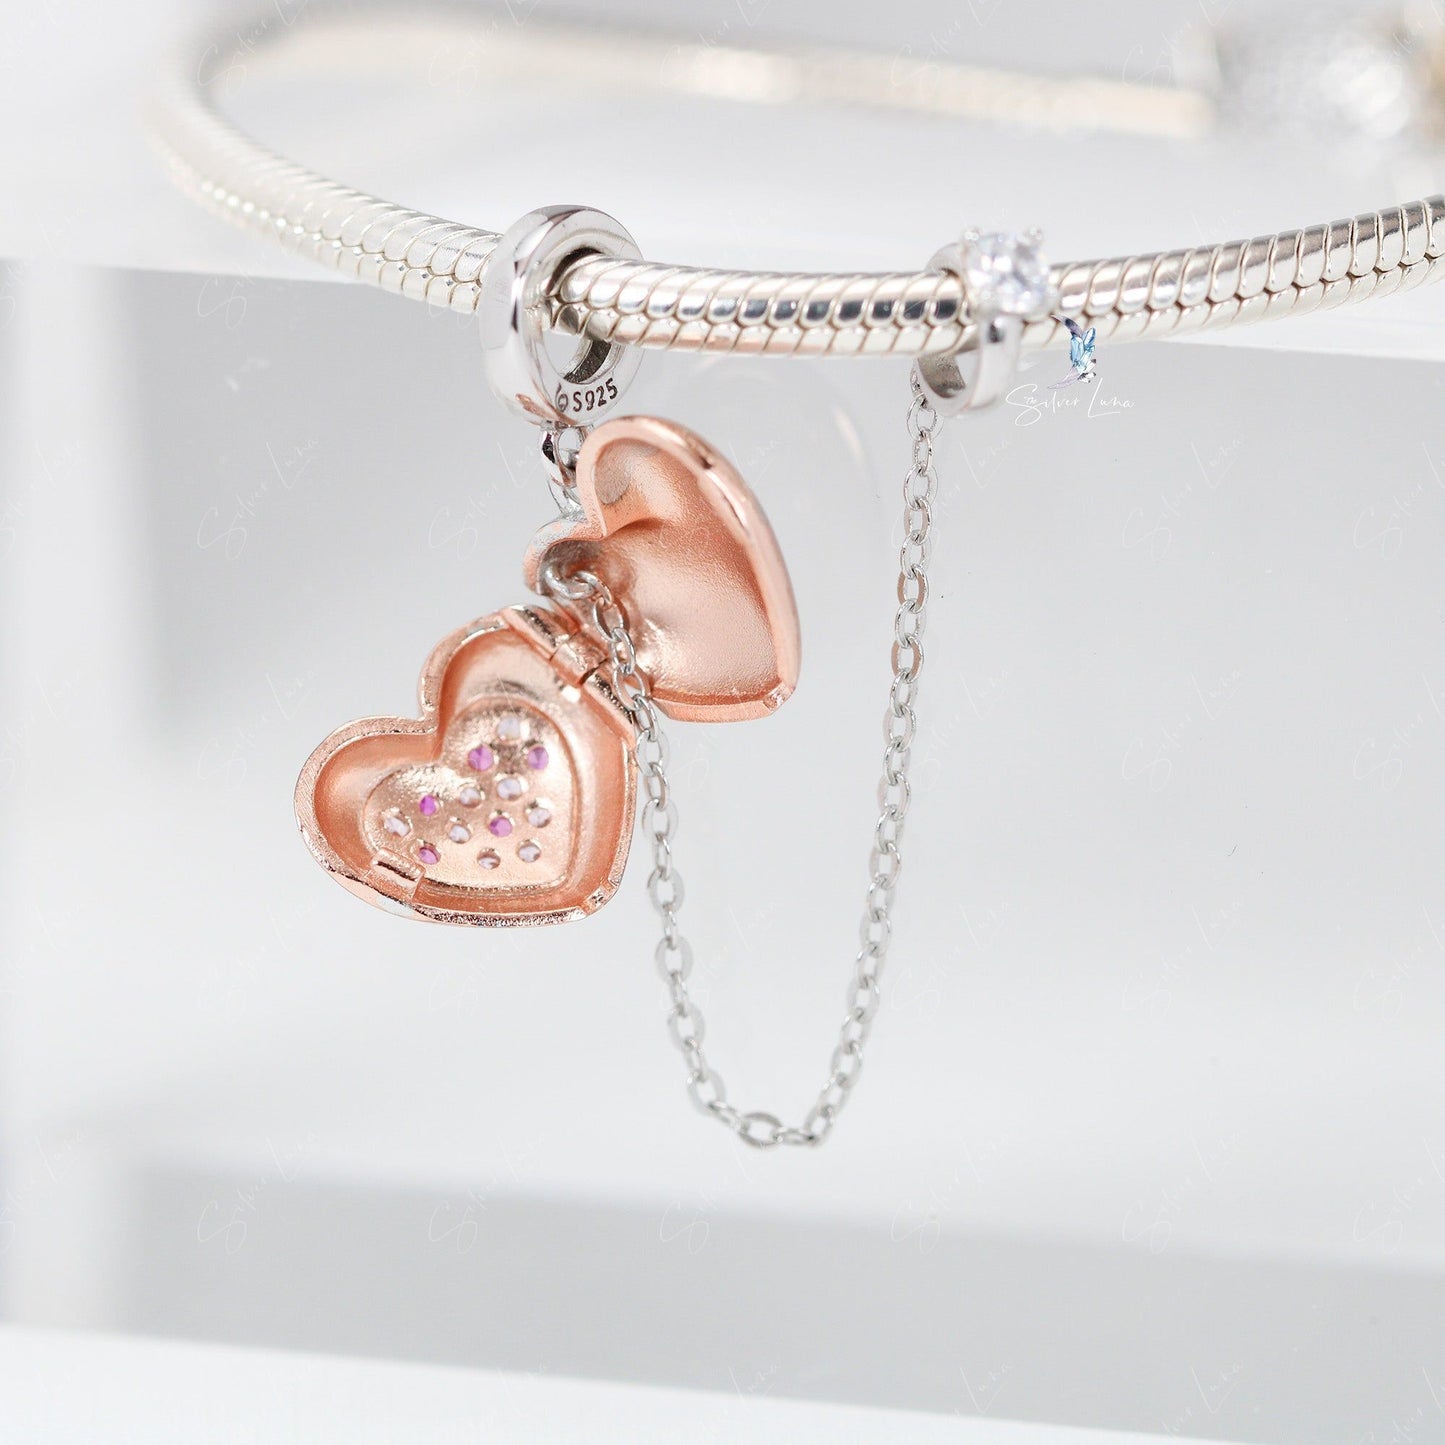 Heart and engagement ring safety chain